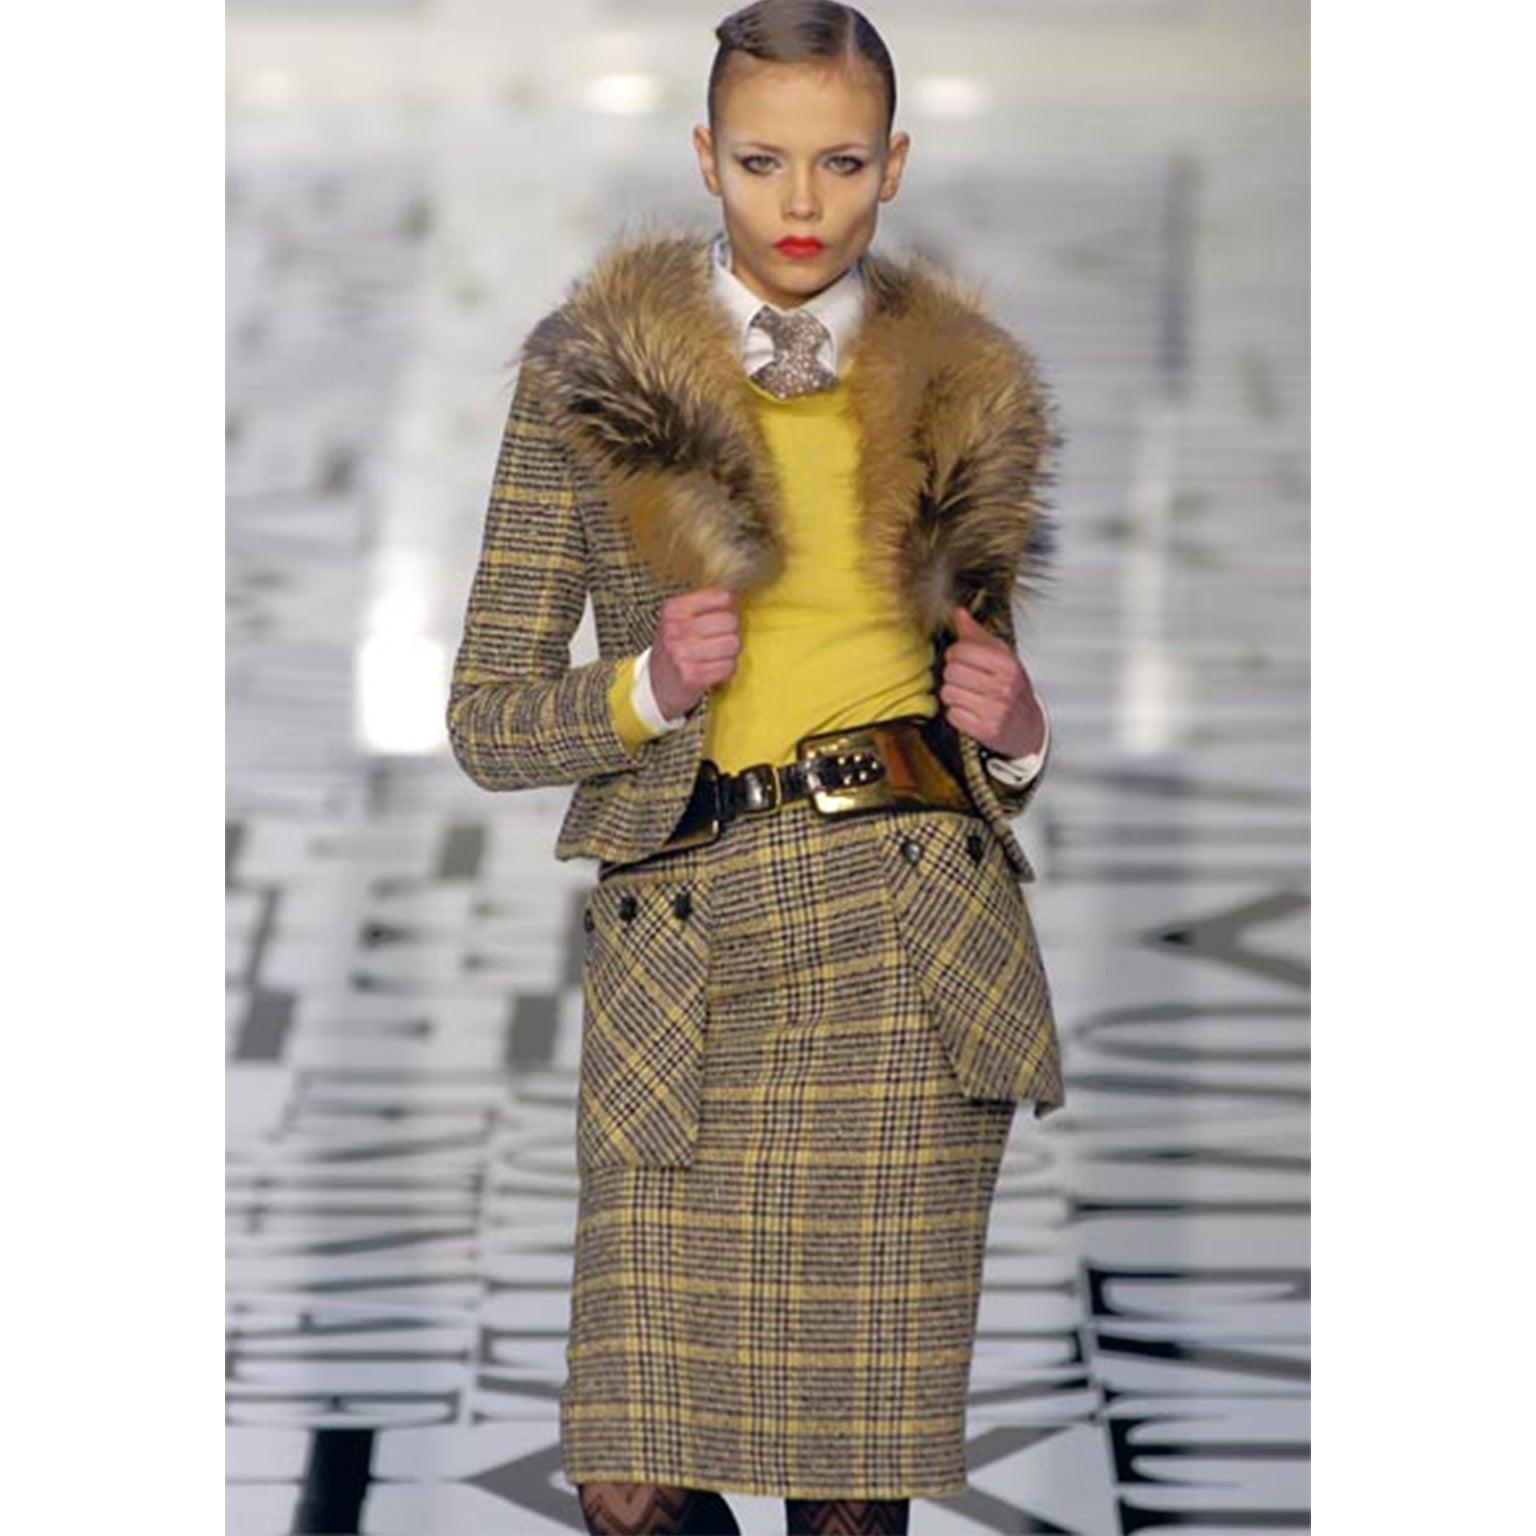 Chanel 2004 04A Nude-Beige Fantasy Tweed Sequin Jacket and Skirt